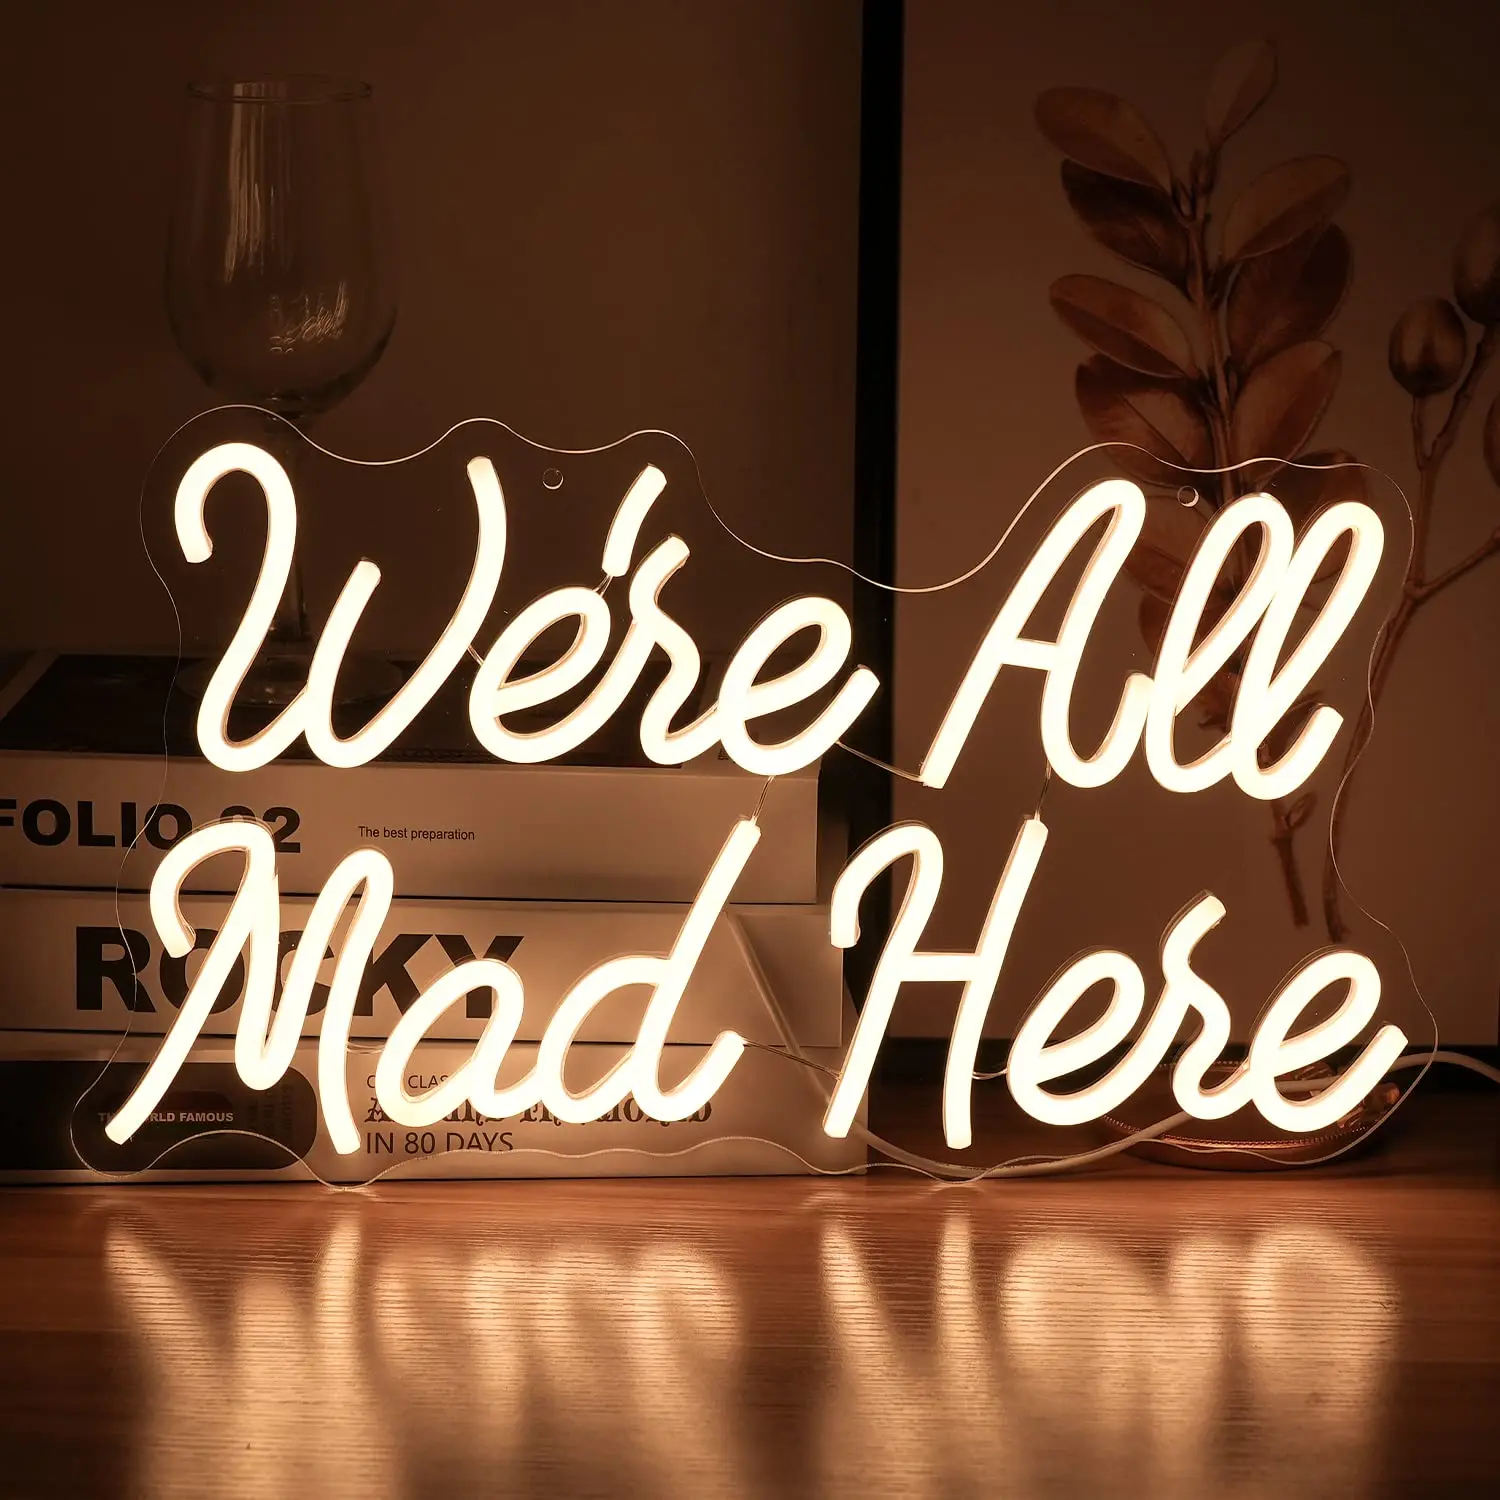 

We Are All Mad Here Neon Sign LED Glow Sign Decoration Supply Letter Neon Sign Interior Wedding Birthday Party Bar Men's Cave